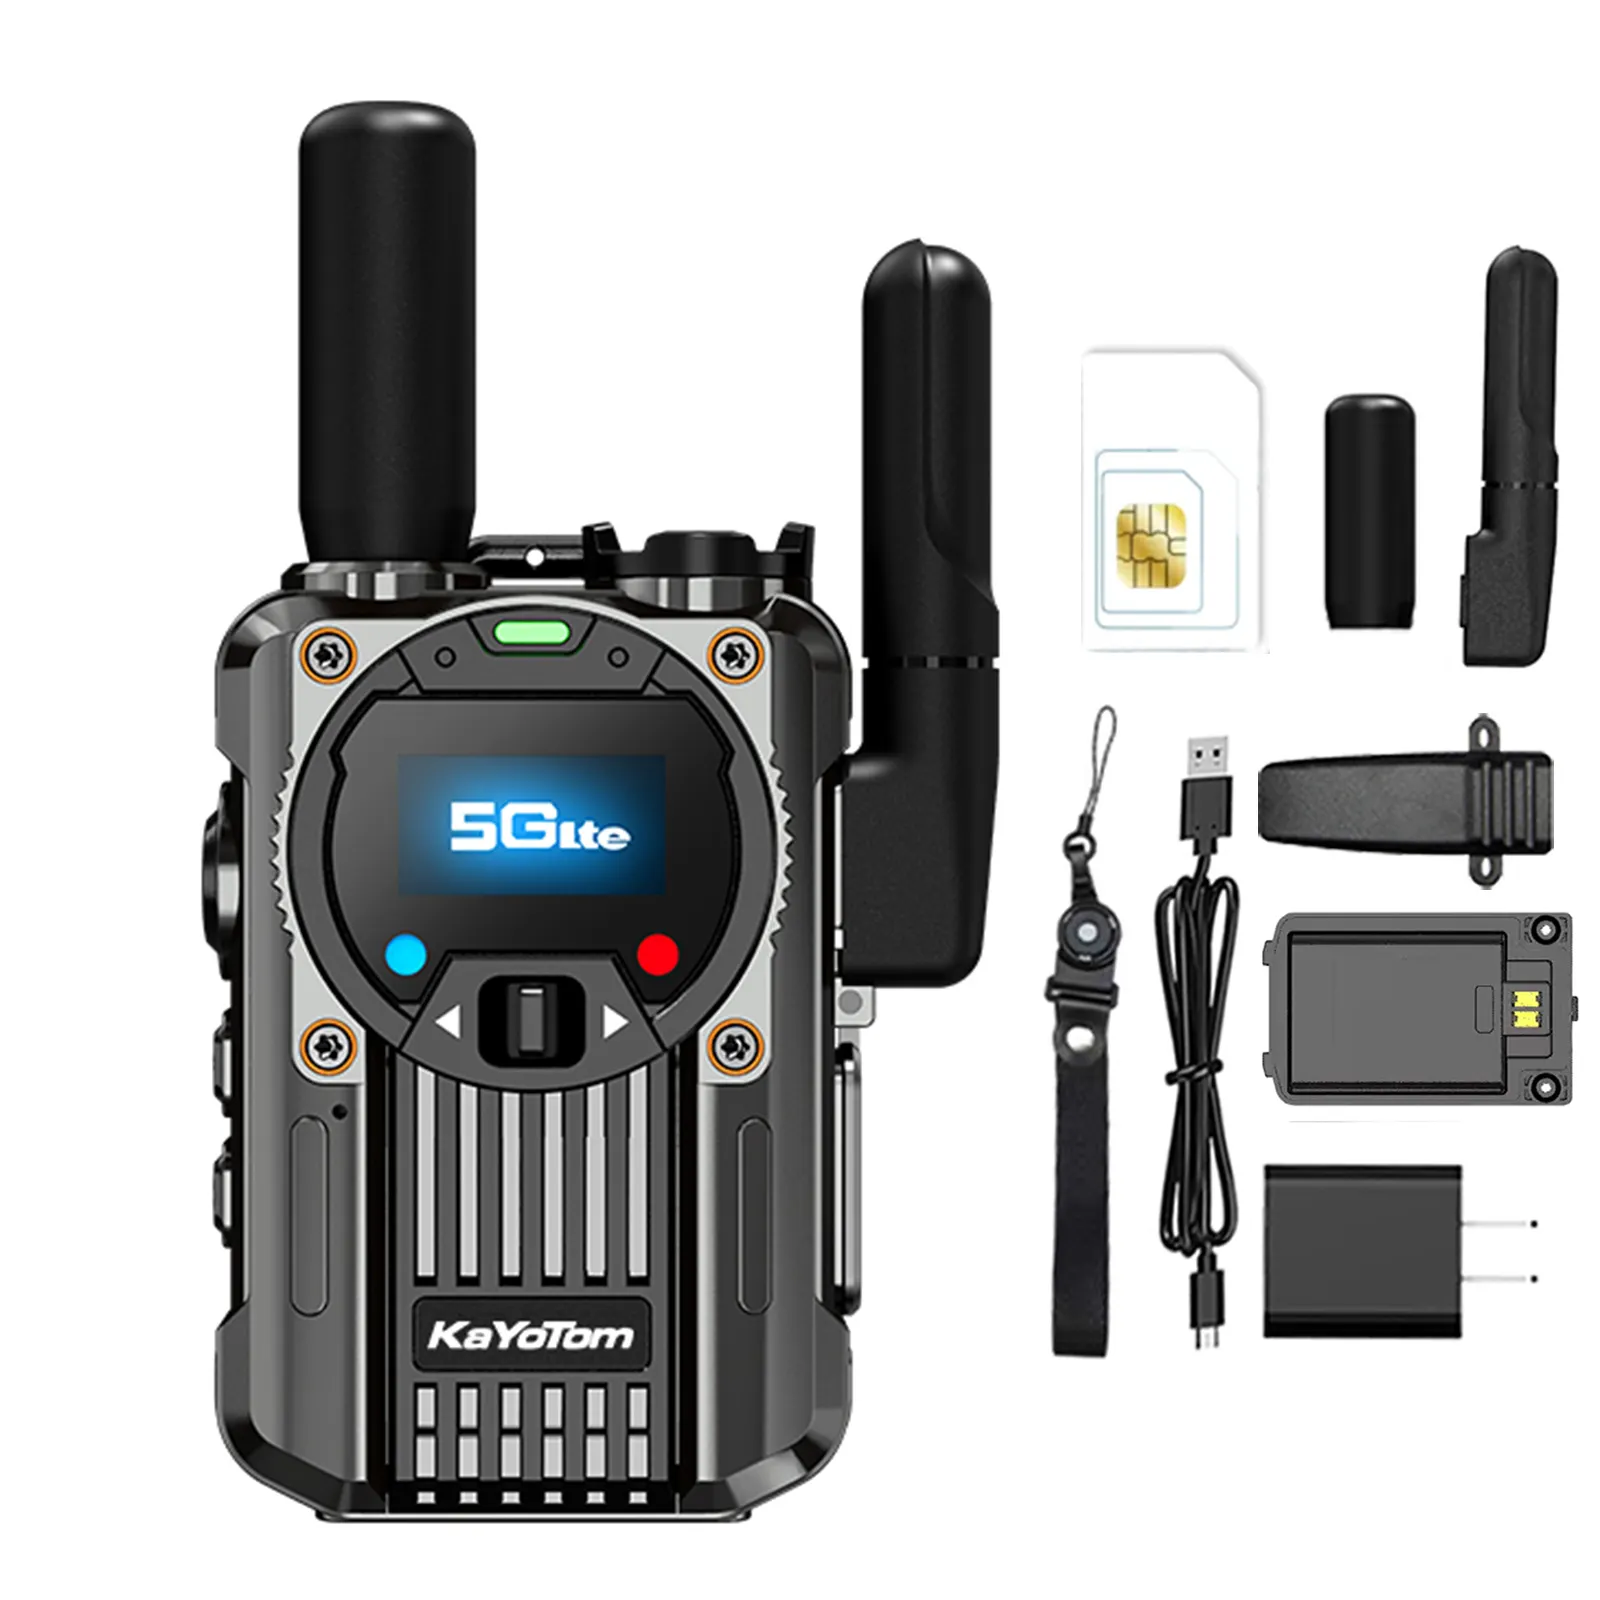 Global Walkie Talkie 4G Walkie Talkie POC with FM radio function, can listen to music Listen to the radio Exclusive Premiere